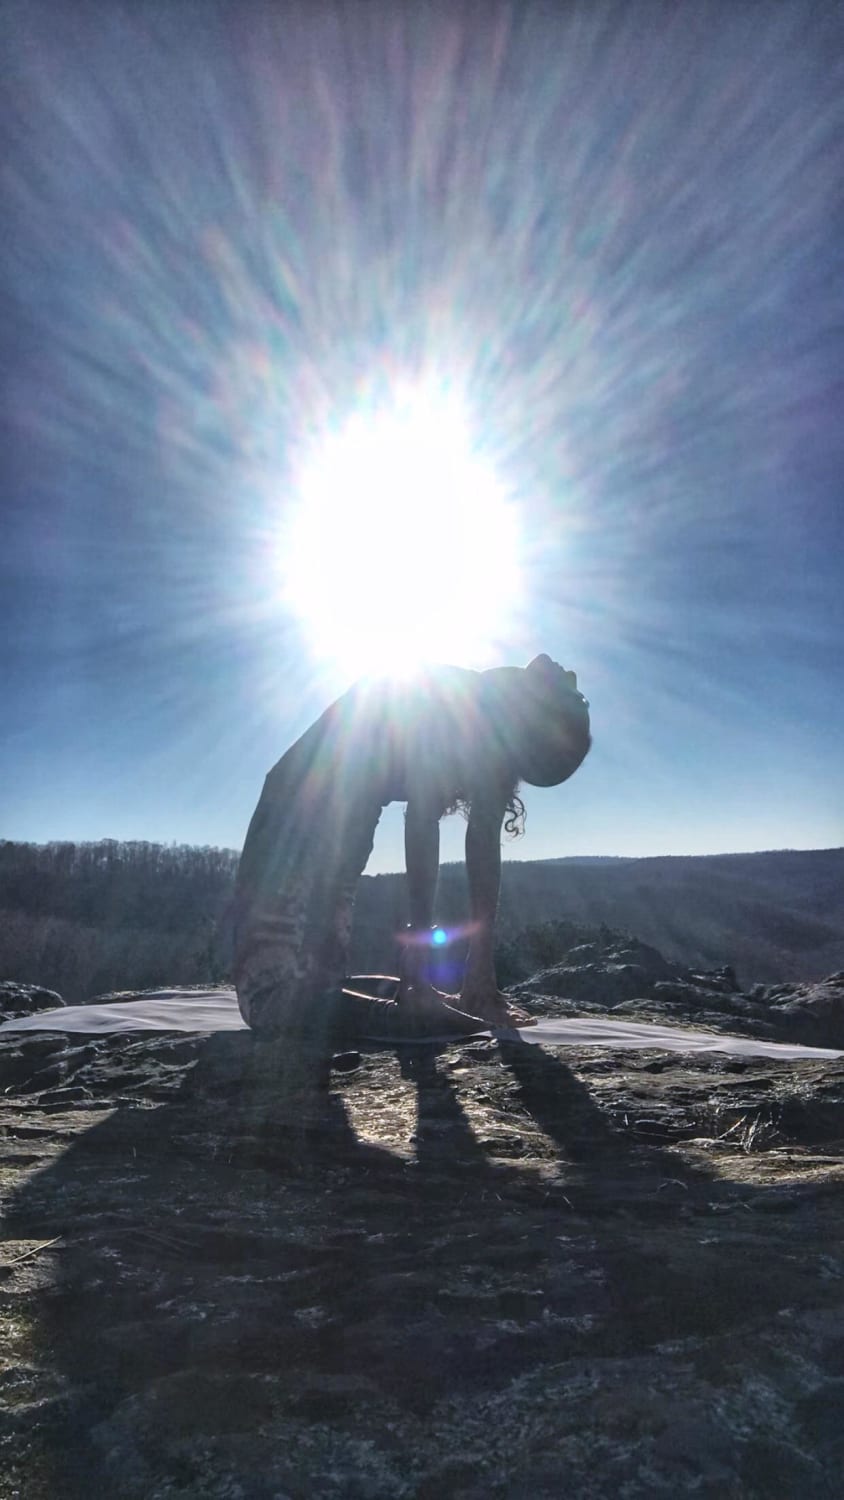 [COMP] I was recording my outdoor practice and camel pose lined up perfectly with the sun. Heart open and receiving solar energy